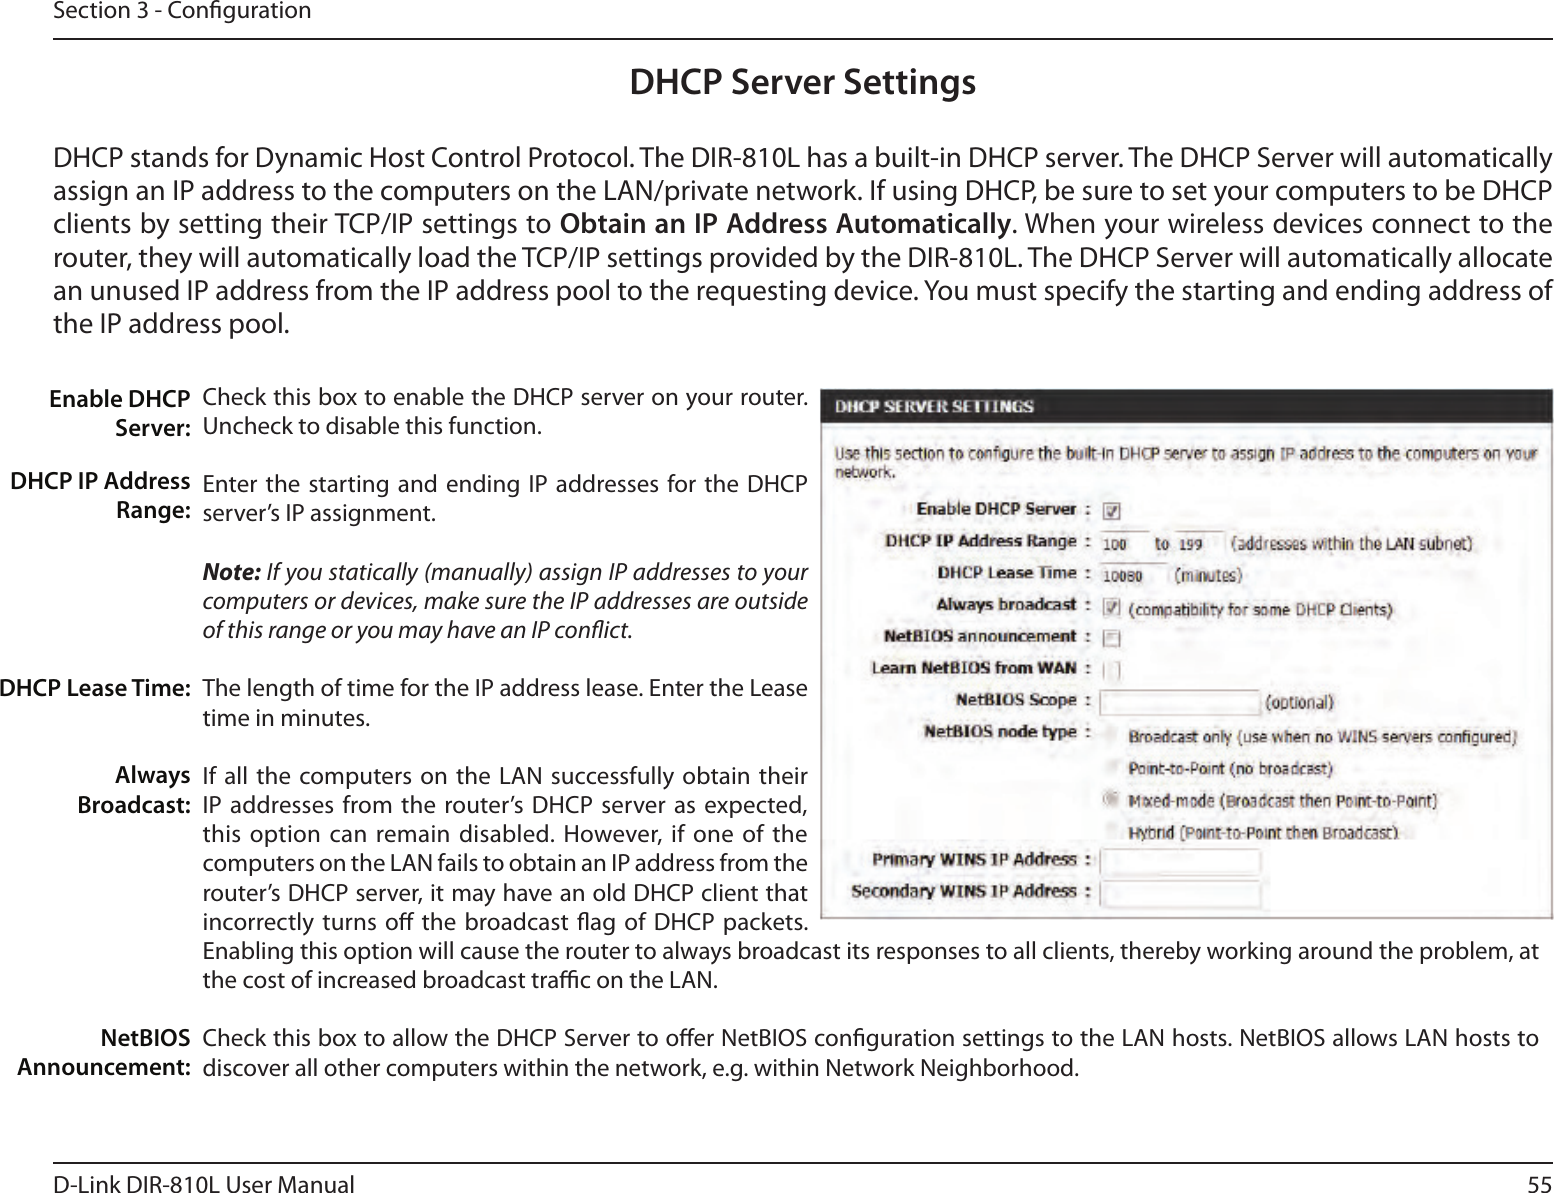 55D-Link DIR-810L User ManualSection 3 - CongurationDHCP Server SettingsDHCP stands for Dynamic Host Control Protocol. The DIR-810L has a built-in DHCP server. The DHCP Server will automatically assign an IP address to the computers on the LAN/private network. If using DHCP, be sure to set your computers to be DHCP clients by setting their TCP/IP settings to Obtain an IP Address Automatically. When your wireless devices connect to the router, they will automatically load the TCP/IP settings provided by the DIR-810L. The DHCP Server will automatically allocate an unused IP address from the IP address pool to the requesting device. You must specify the starting and ending address of the IP address pool.Check this box to enable the DHCP server on your router. Uncheck to disable this function.Enter the starting  and ending IP  addresses for the  DHCP server’s IP assignment.Note: If you statically (manually) assign IP addresses to your computers or devices, make sure the IP addresses are outside of this range or you may have an IP conict. The length of time for the IP address lease. Enter the Lease time in minutes.If all the  computers on the LAN  successfully obtain  their IP addresses from the router’s DHCP  server as  expected, this option  can remain disabled. However, if  one  of the computers on the LAN fails to obtain an IP address from the router’s DHCP server, it may have an old DHCP client that incorrectly turns  o  the broadcast ag of  DHCP packets. Enabling this option will cause the router to always broadcast its responses to all clients, thereby working around the problem, at the cost of increased broadcast trac on the LAN.Check this box to allow the DHCP Server to oer NetBIOS conguration settings to the LAN hosts. NetBIOS allows LAN hosts to discover all other computers within the network, e.g. within Network Neighborhood.Enable DHCP Server:DHCP IP Address Range:DHCP Lease Time:Always Broadcast:NetBIOS Announcement: